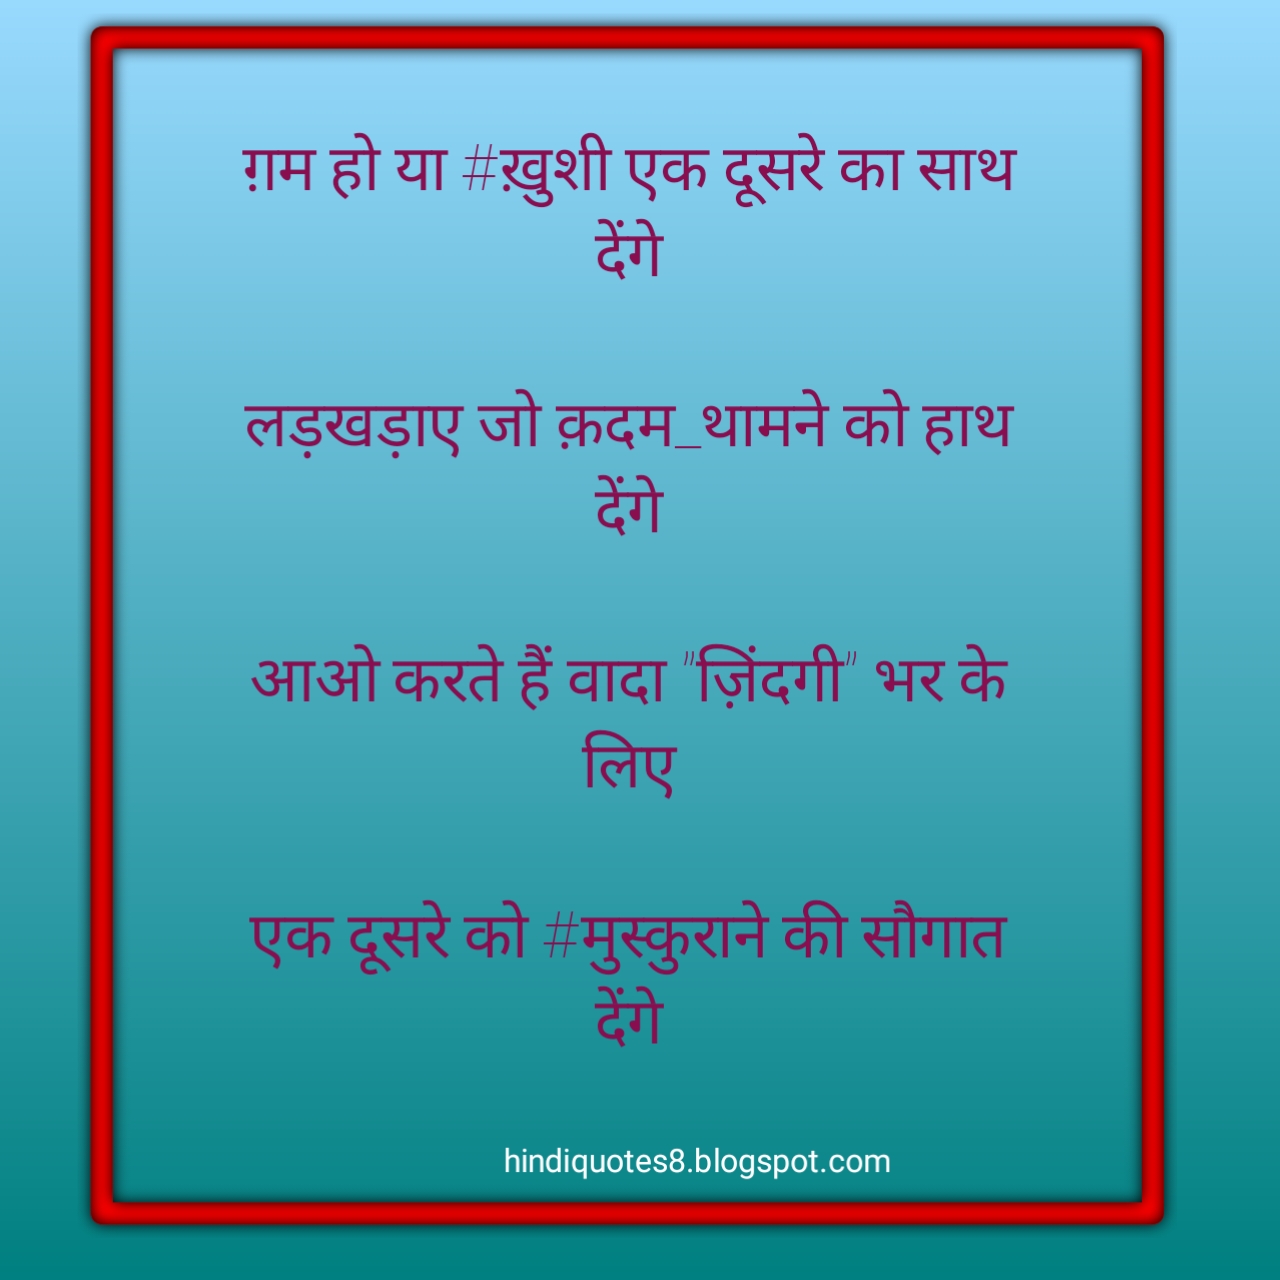 Forever Together: Inspiring Quotes for Husband-Wife Bond in Hindi